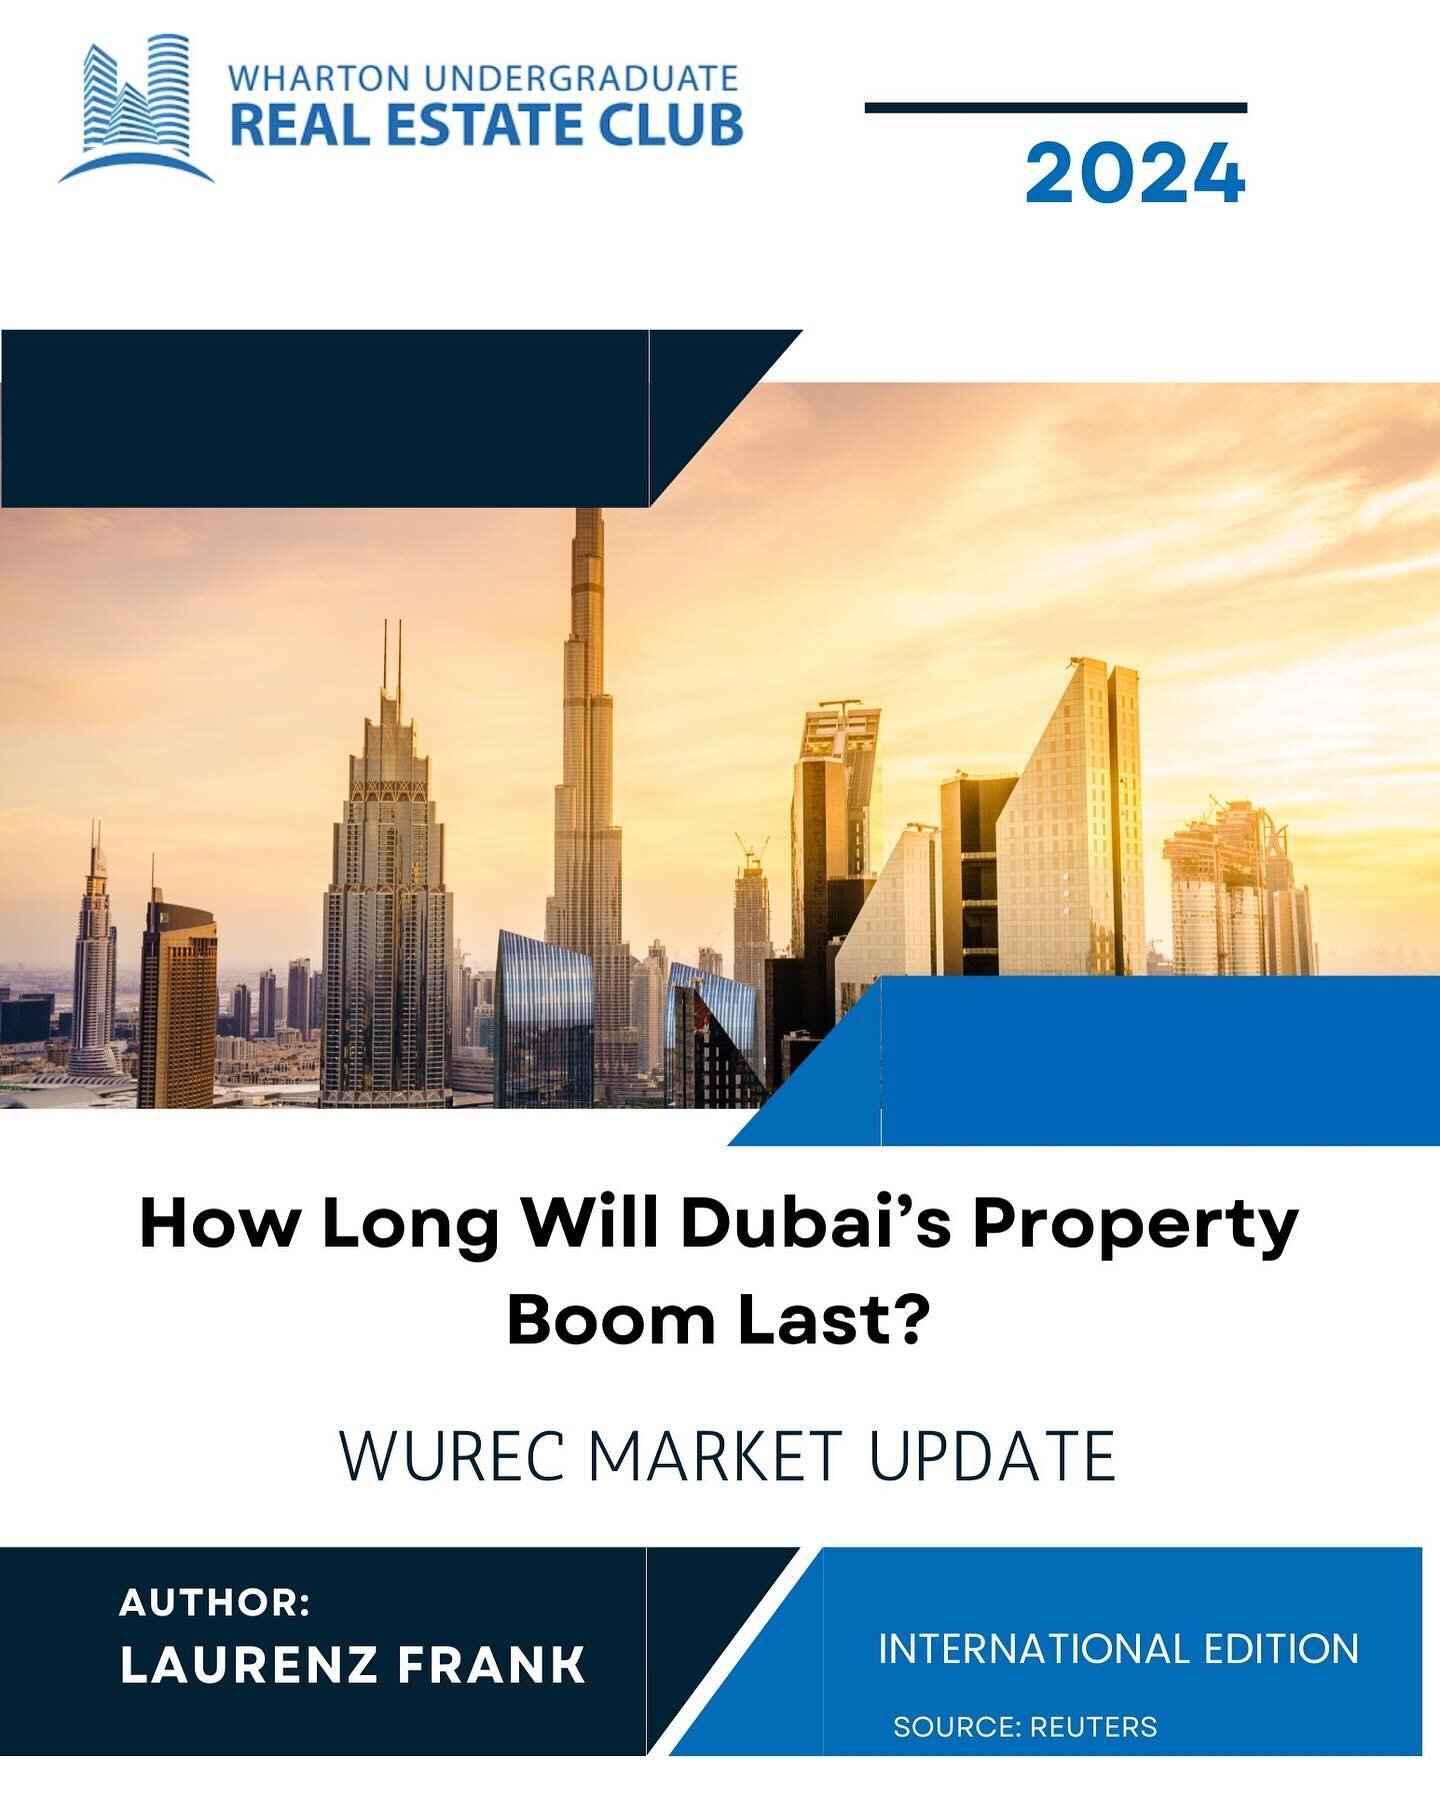 In our successful trip to Dubai recently, we explored the vibrant culture coupled with the dynamic real estate landscape. Discover more about the real estate market in Dubai!